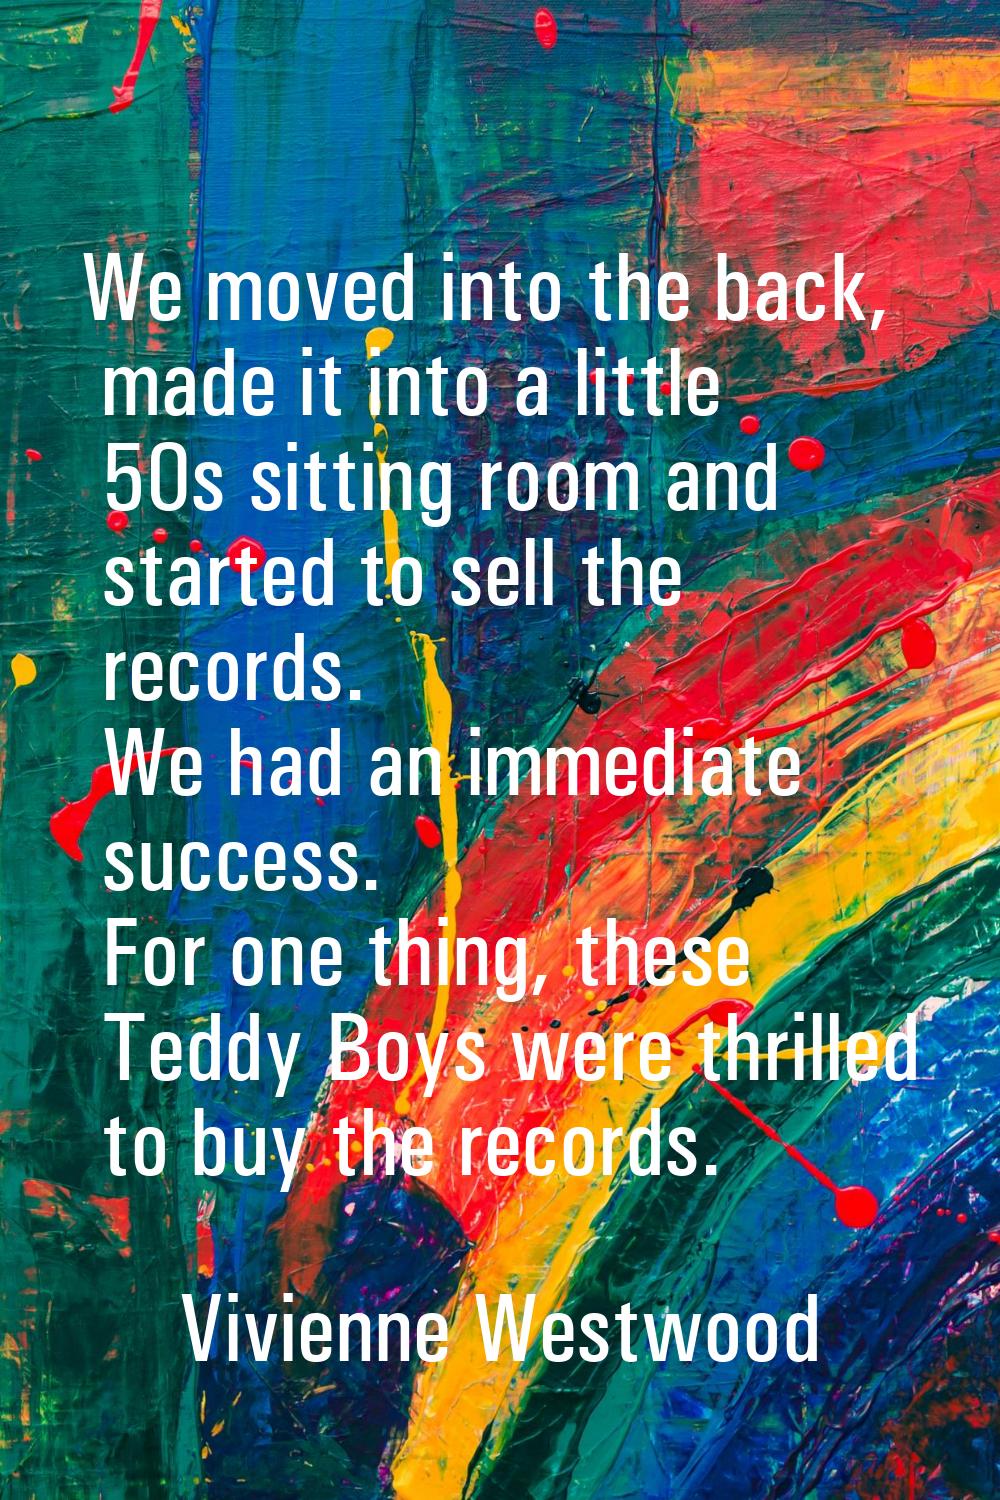 We moved into the back, made it into a little 50s sitting room and started to sell the records. We 